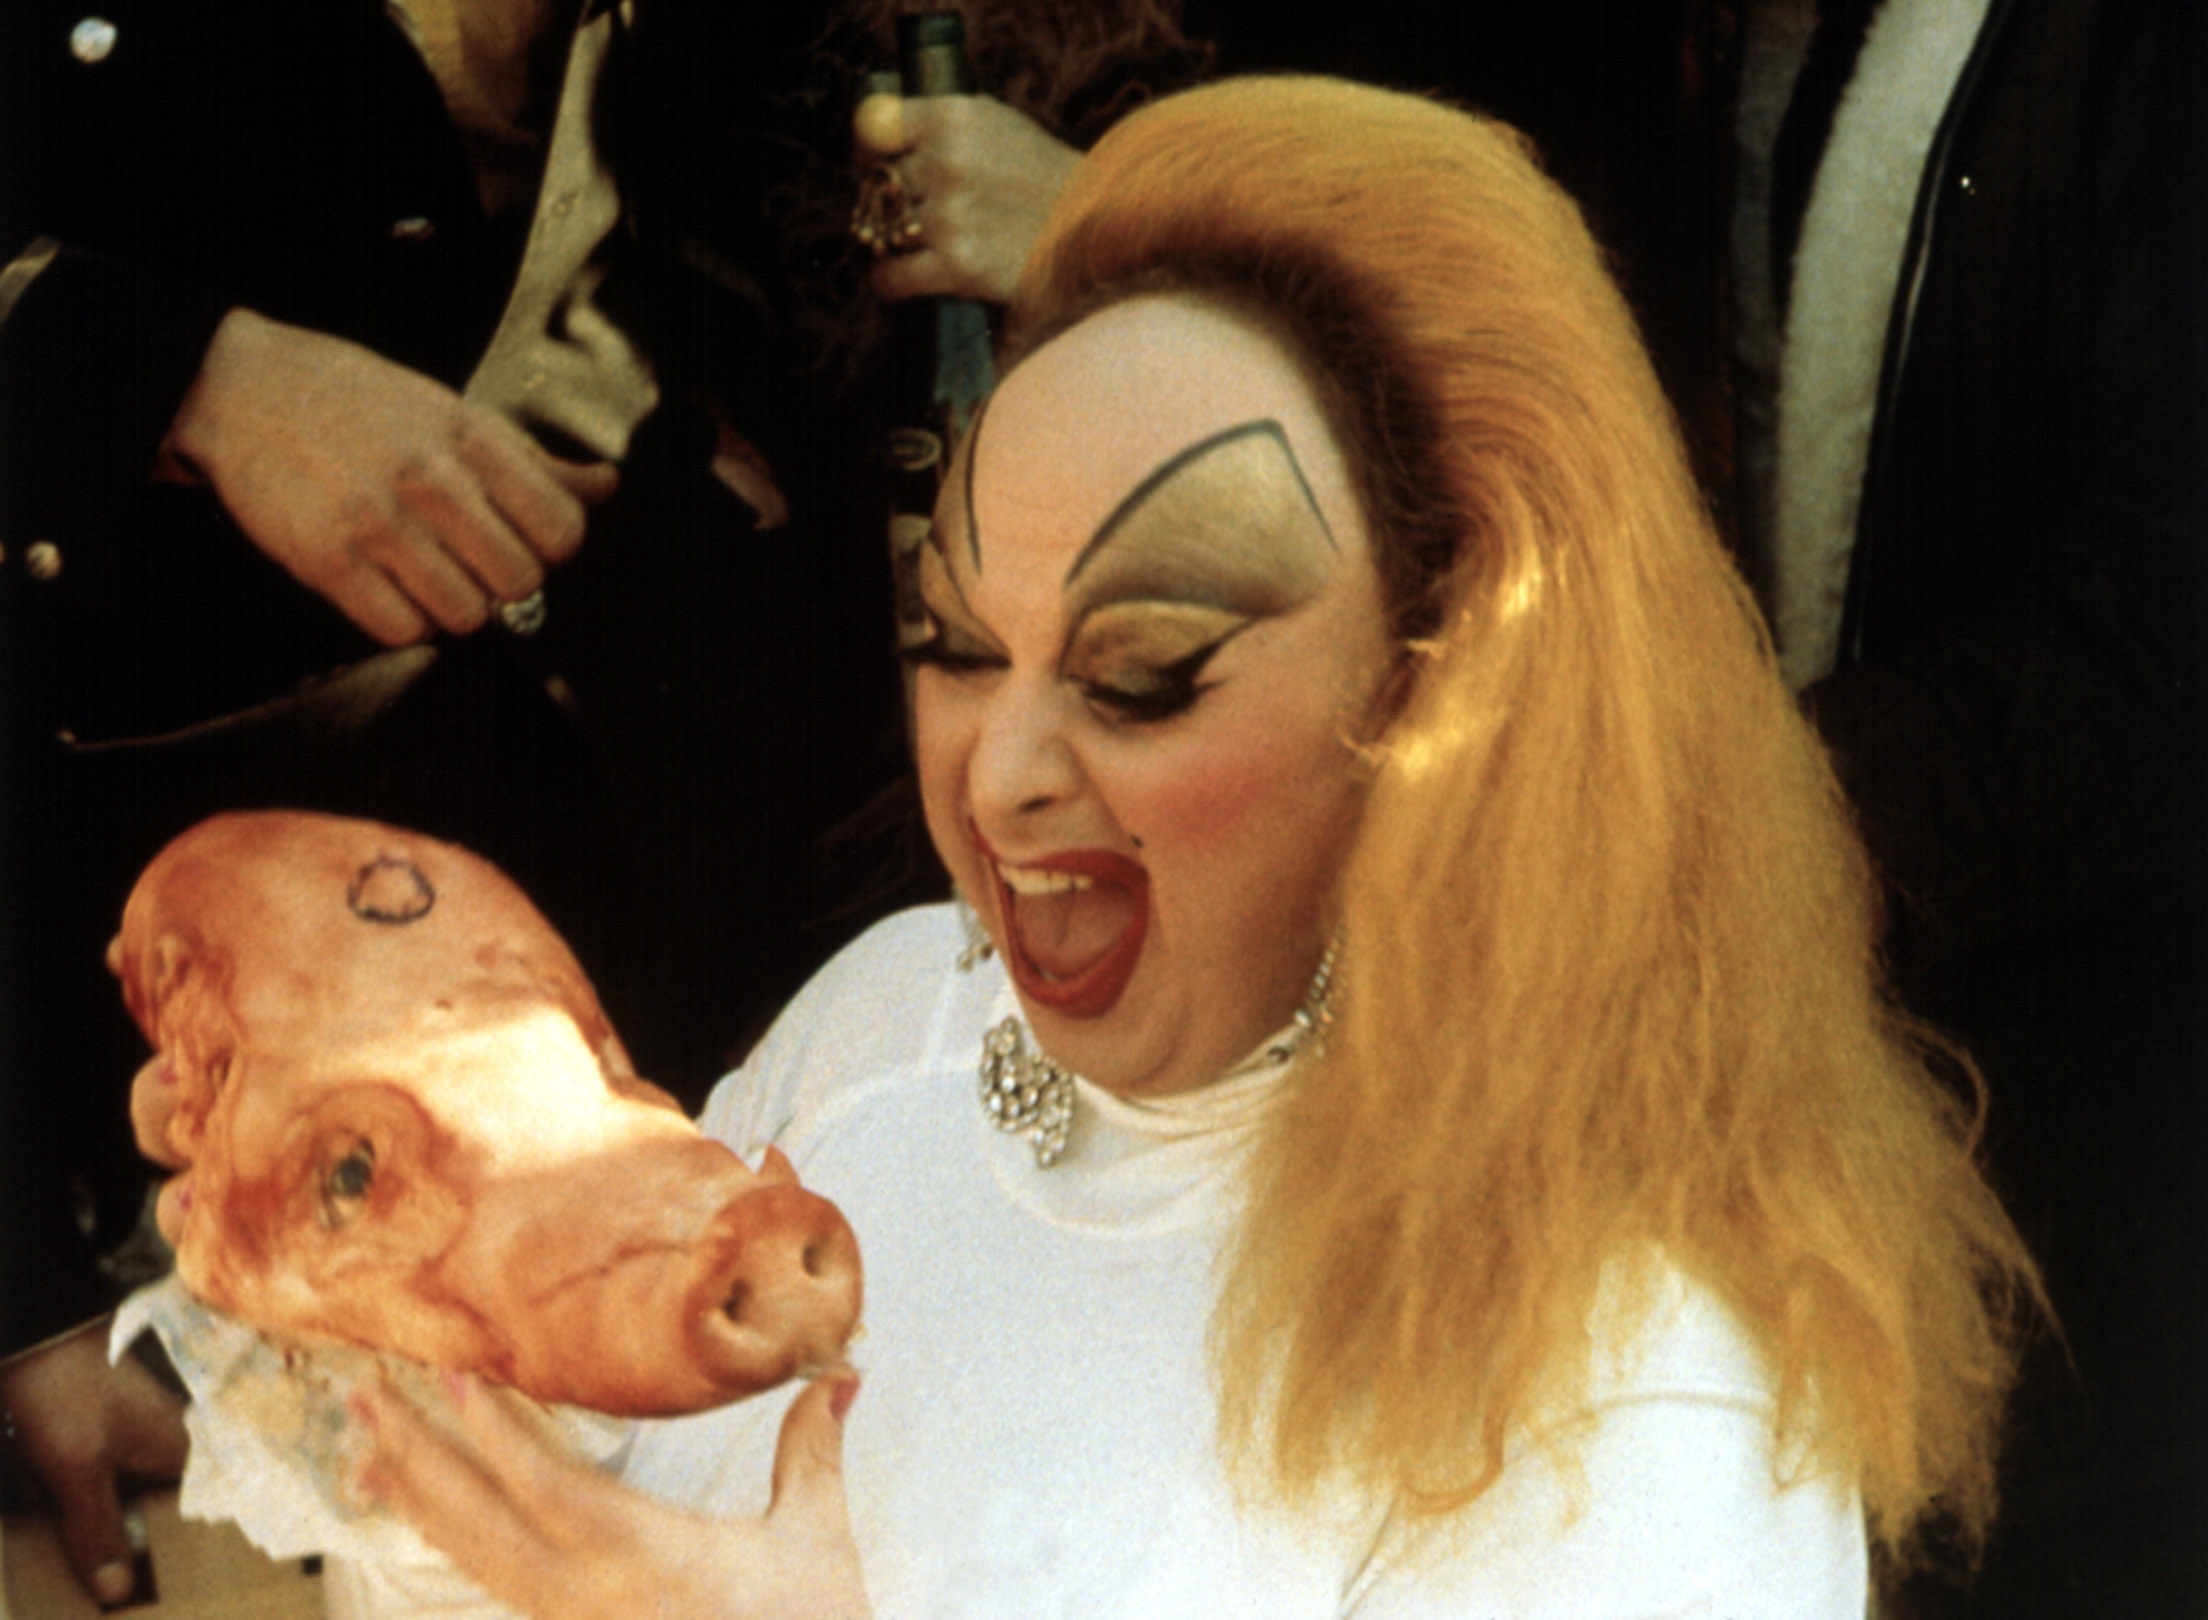 Drag queen Divine holds a pig head